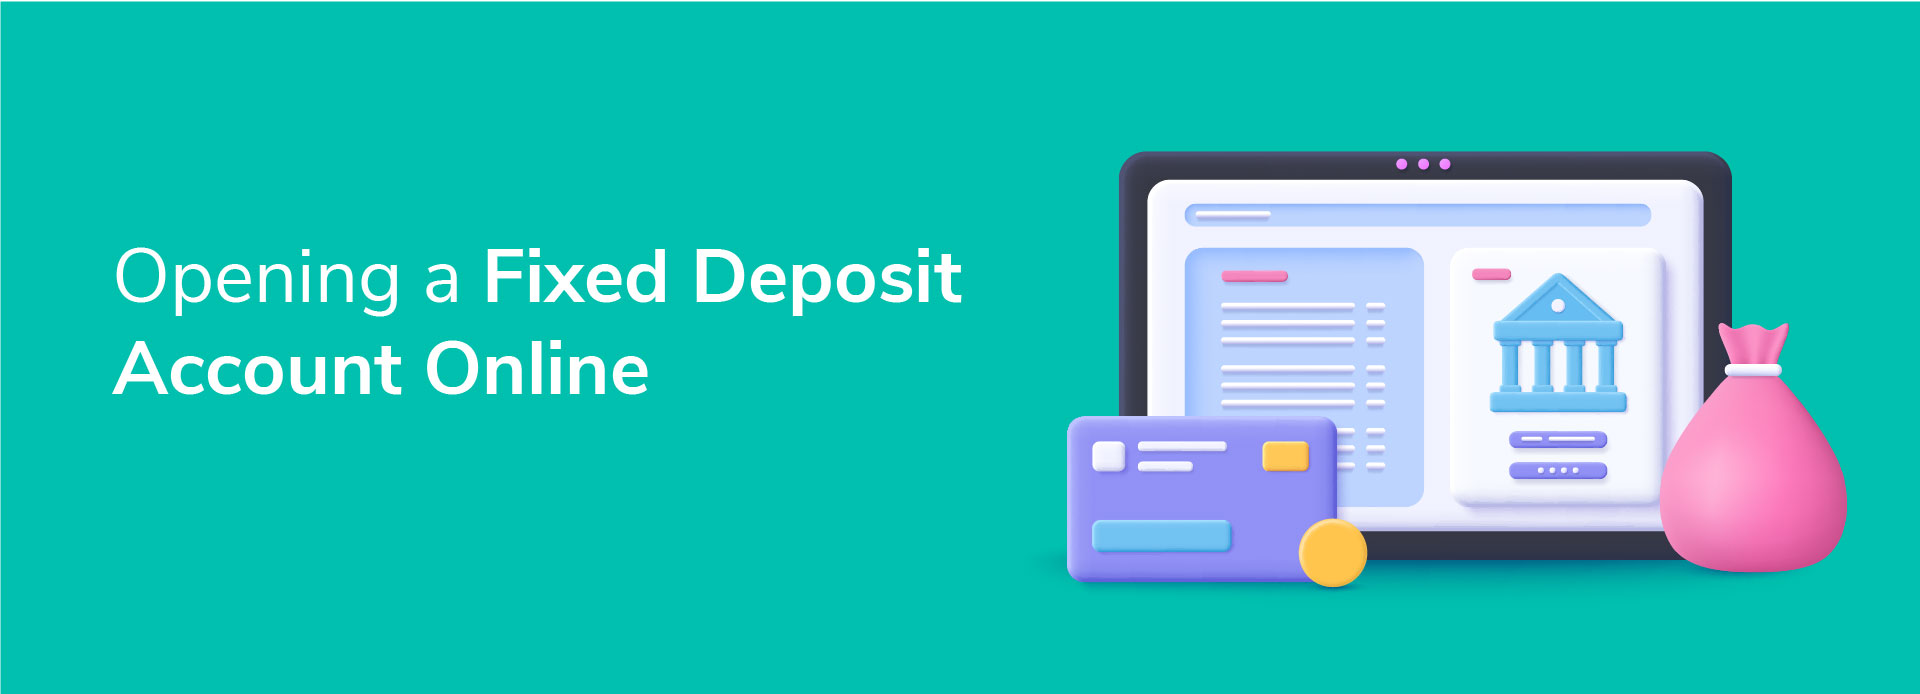 How to Open a Fixed Deposit Account Online 